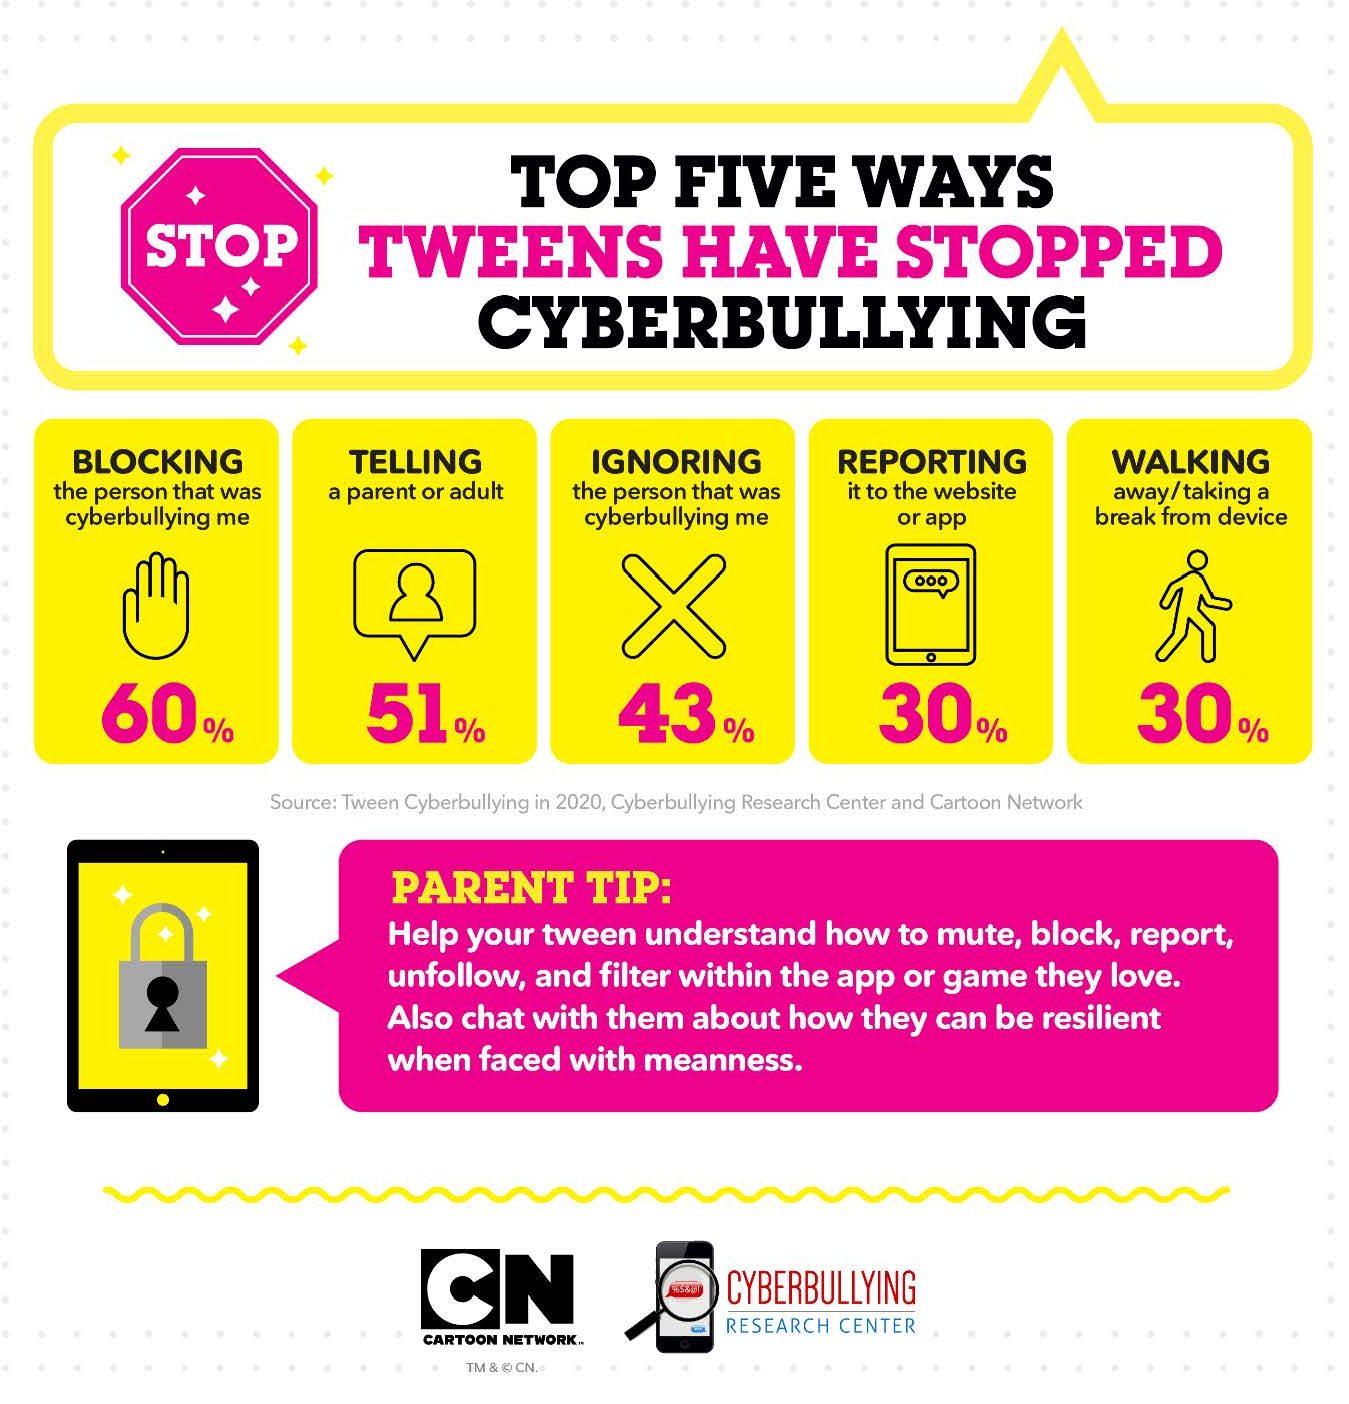 An infographic titled "Top 5 Ways Tweens Have Stopped Cyberbullying"